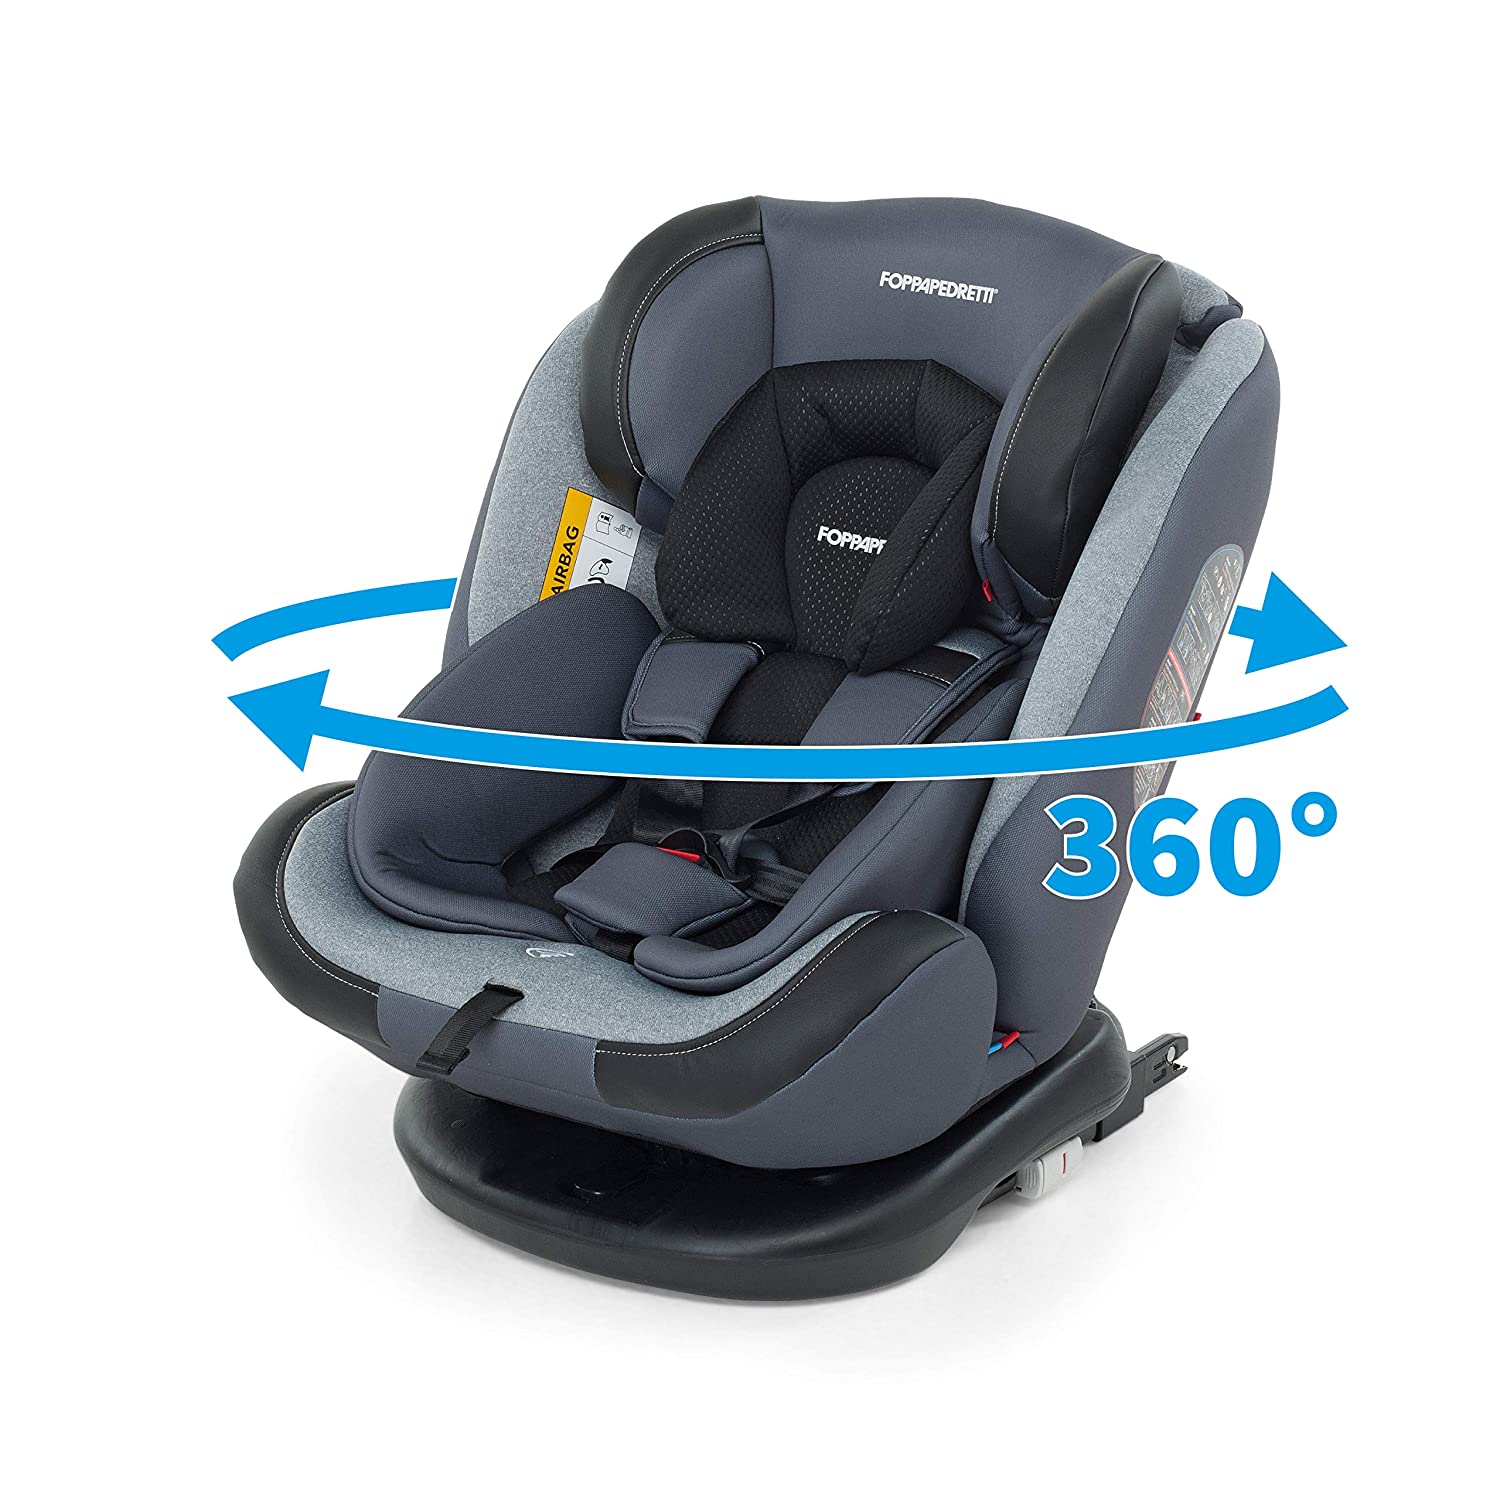 Foppapedretti Iturn duoFIX Sky 9700418804 360° Rotating Car Seat Group 0 + 1/2/3 (0-36 kg) for Children from Birth to 12 Years